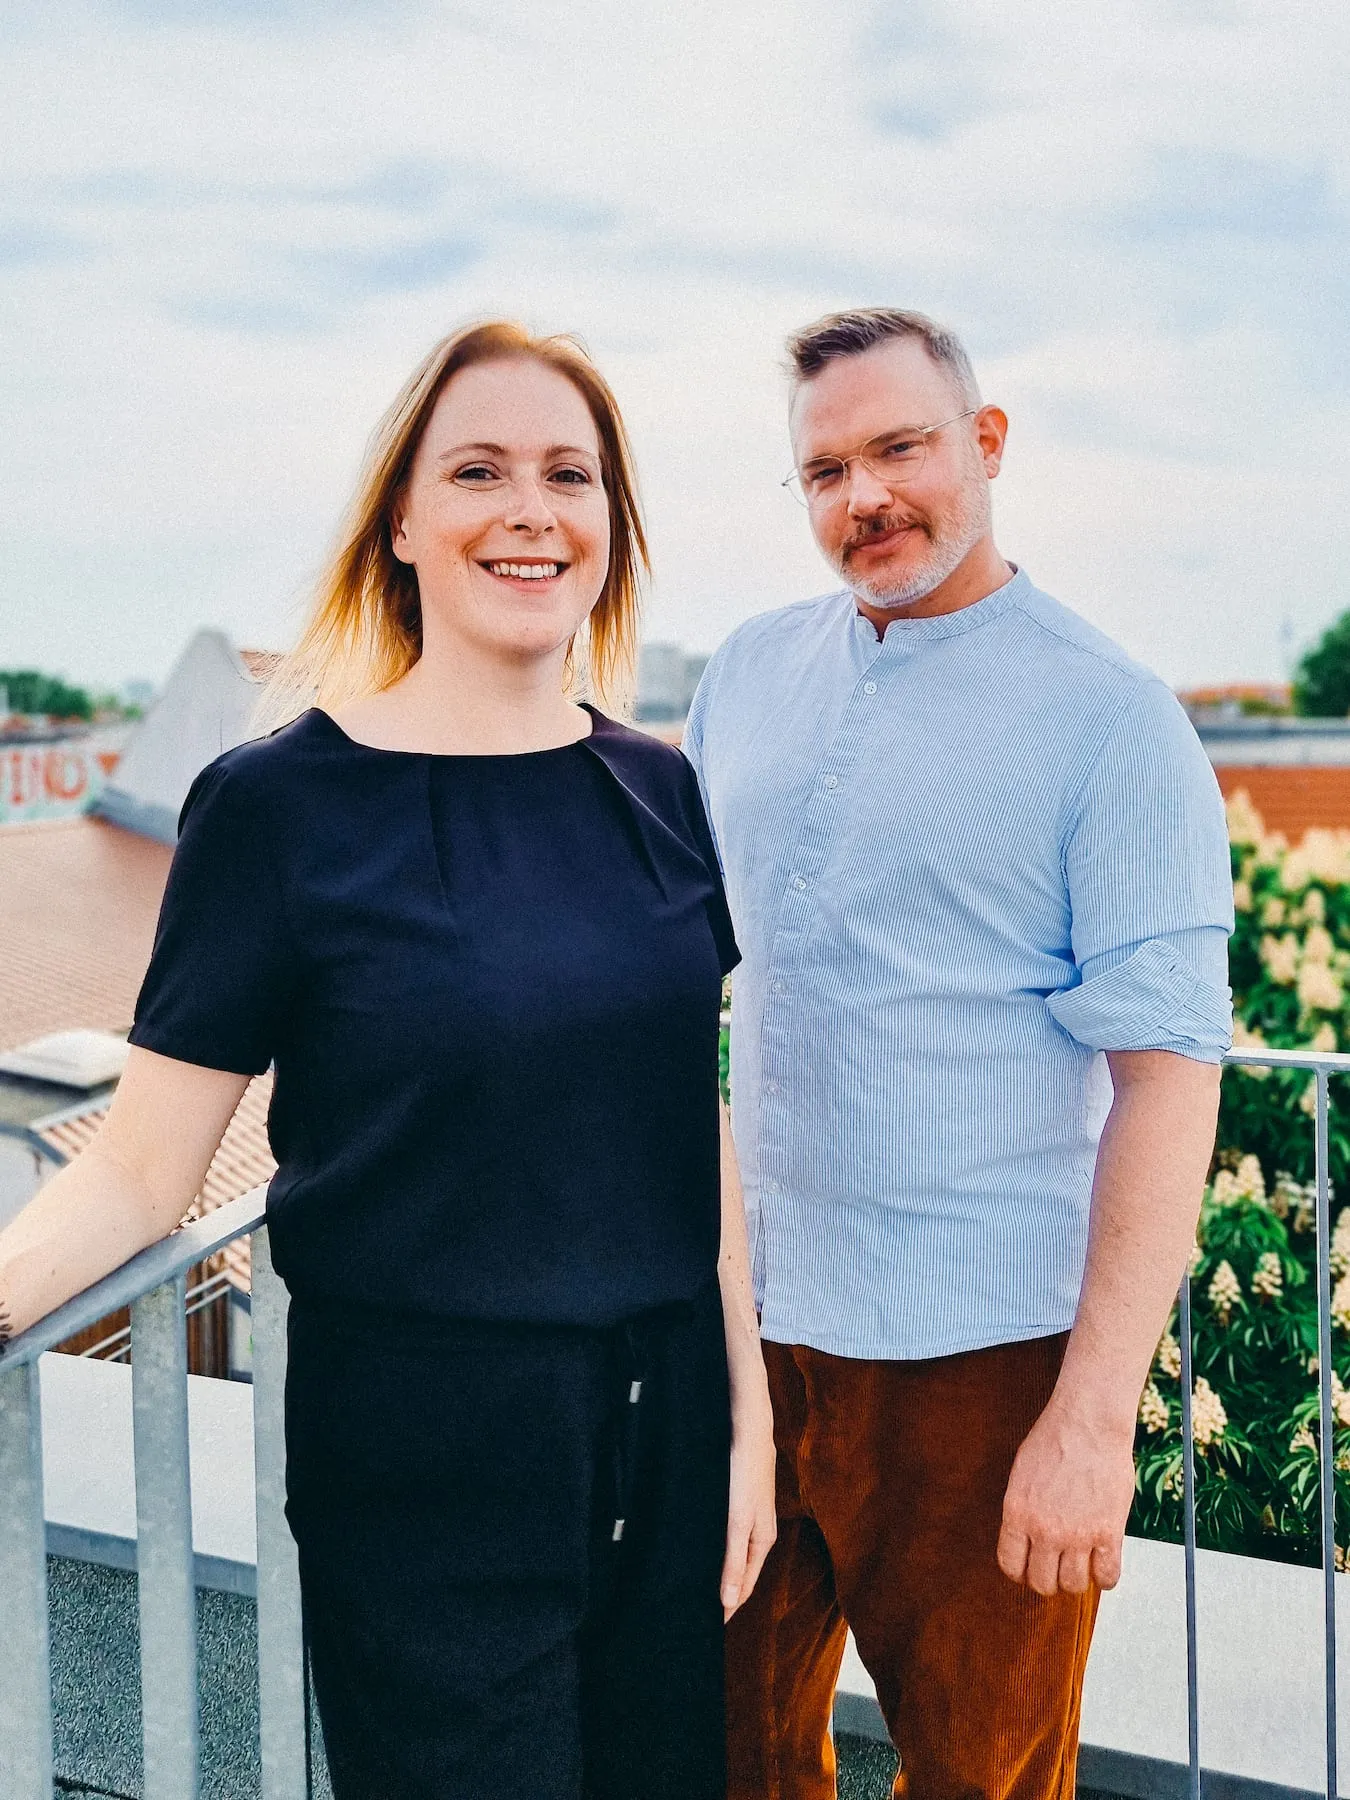 Image of Katrin and Paul standing in front of the Berlin skyline